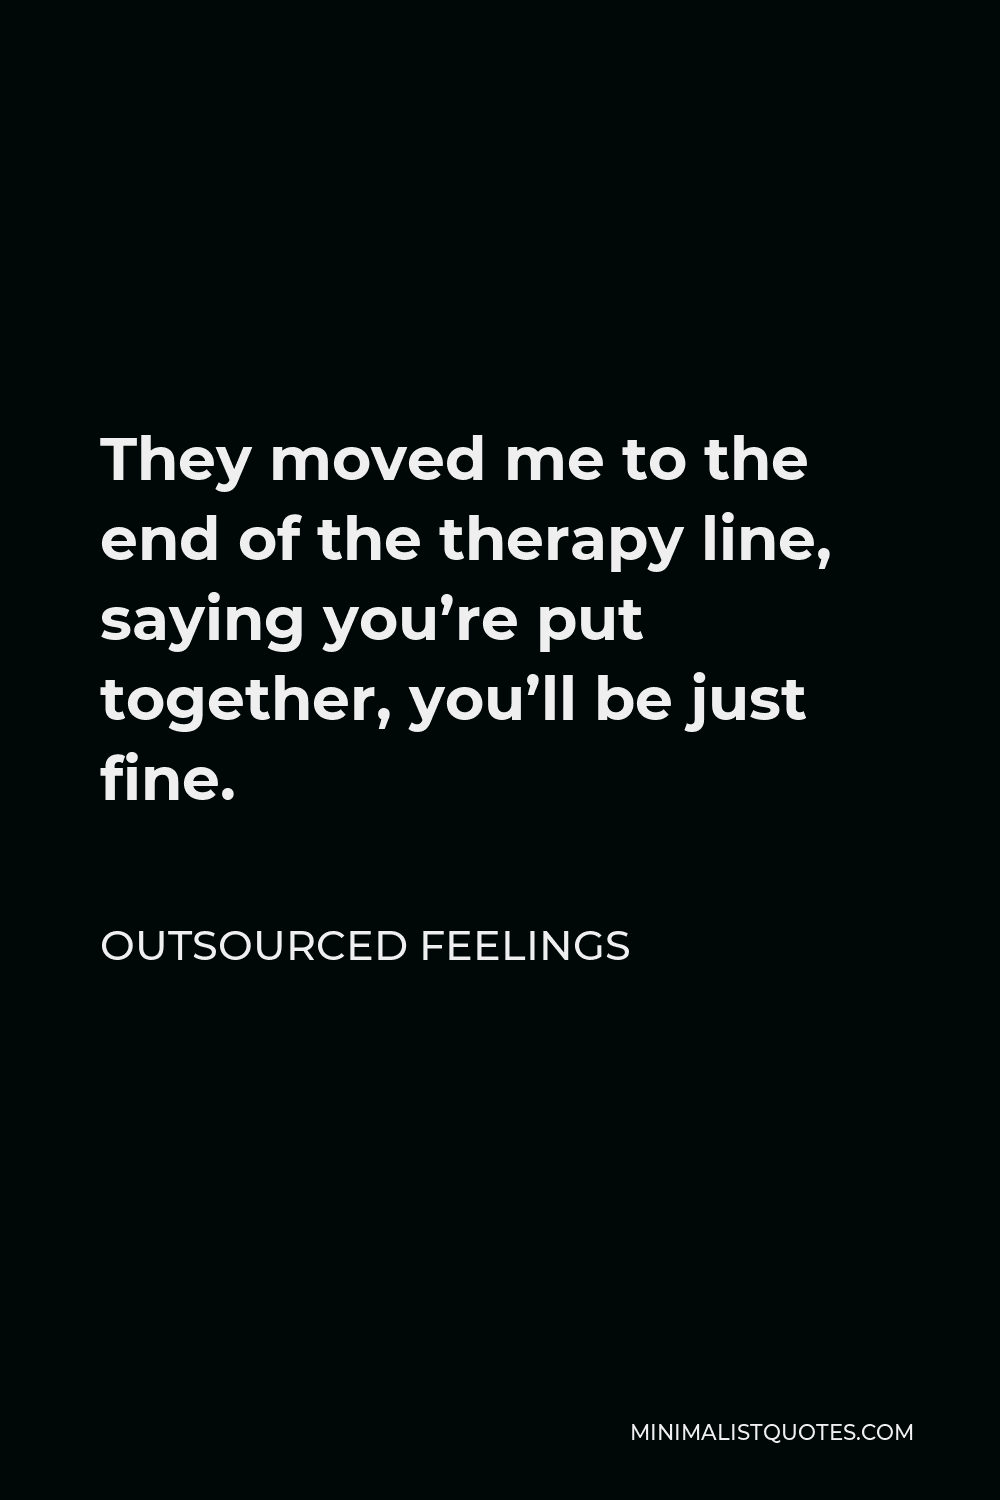 Outsourced Feelings Quote - They moved me to the end of the therapy line, saying you’re put together, you’ll be just fine.